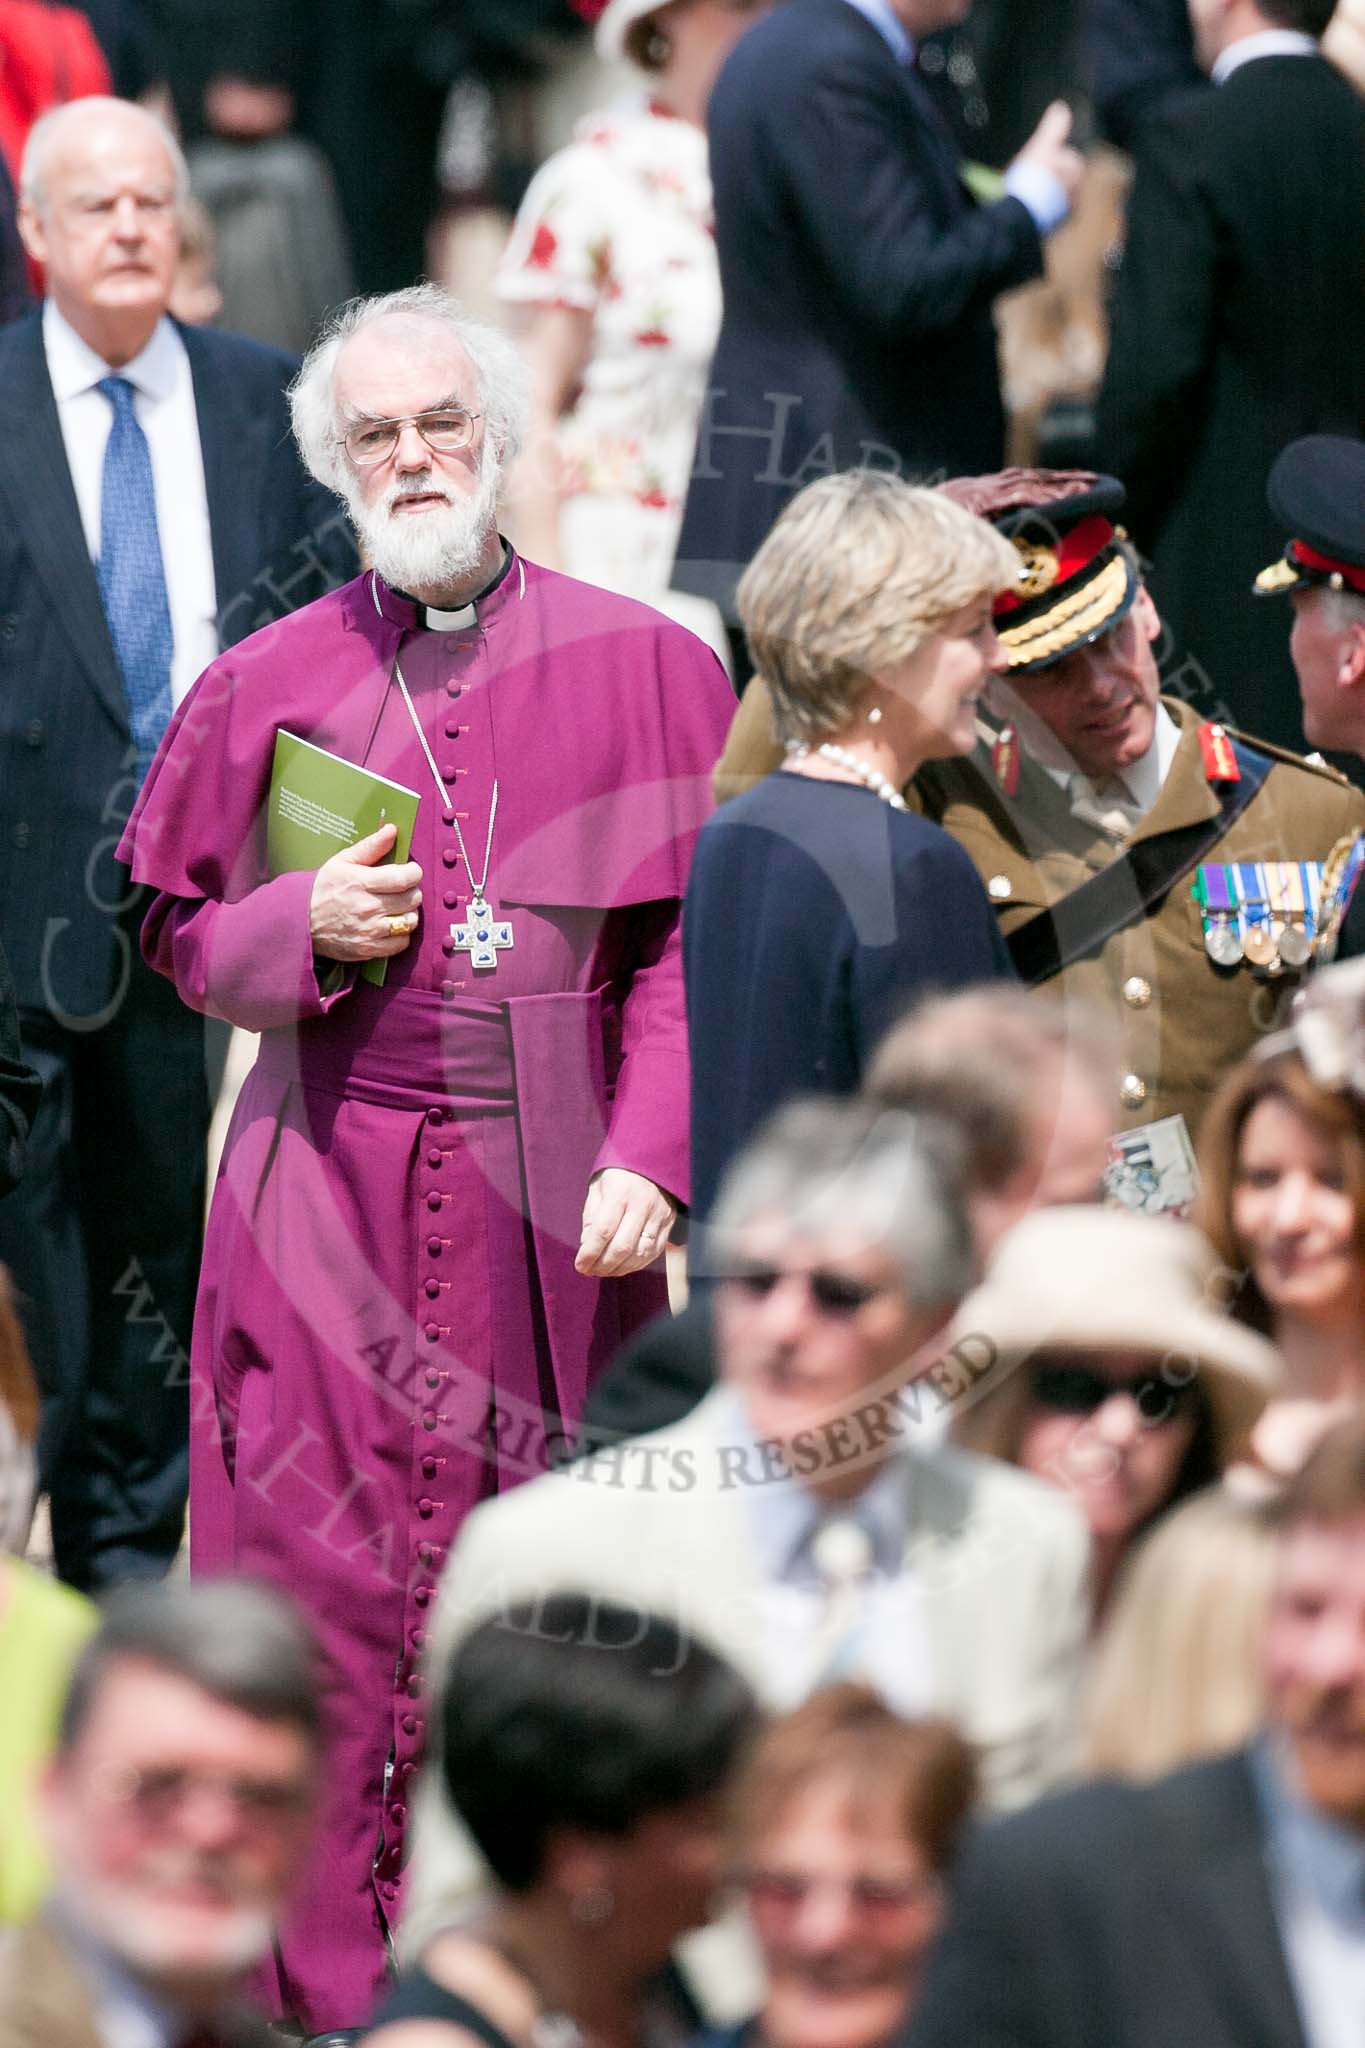 Trooping the Colour 2009: Rowan Williams, the Archbishop of Canterbury, leaving the grand stand after the parade, carrying a programme of the parade..
Horse Guards Parade, Westminster,
London SW1,

United Kingdom,
on 13 June 2009 at 12:23, image #274